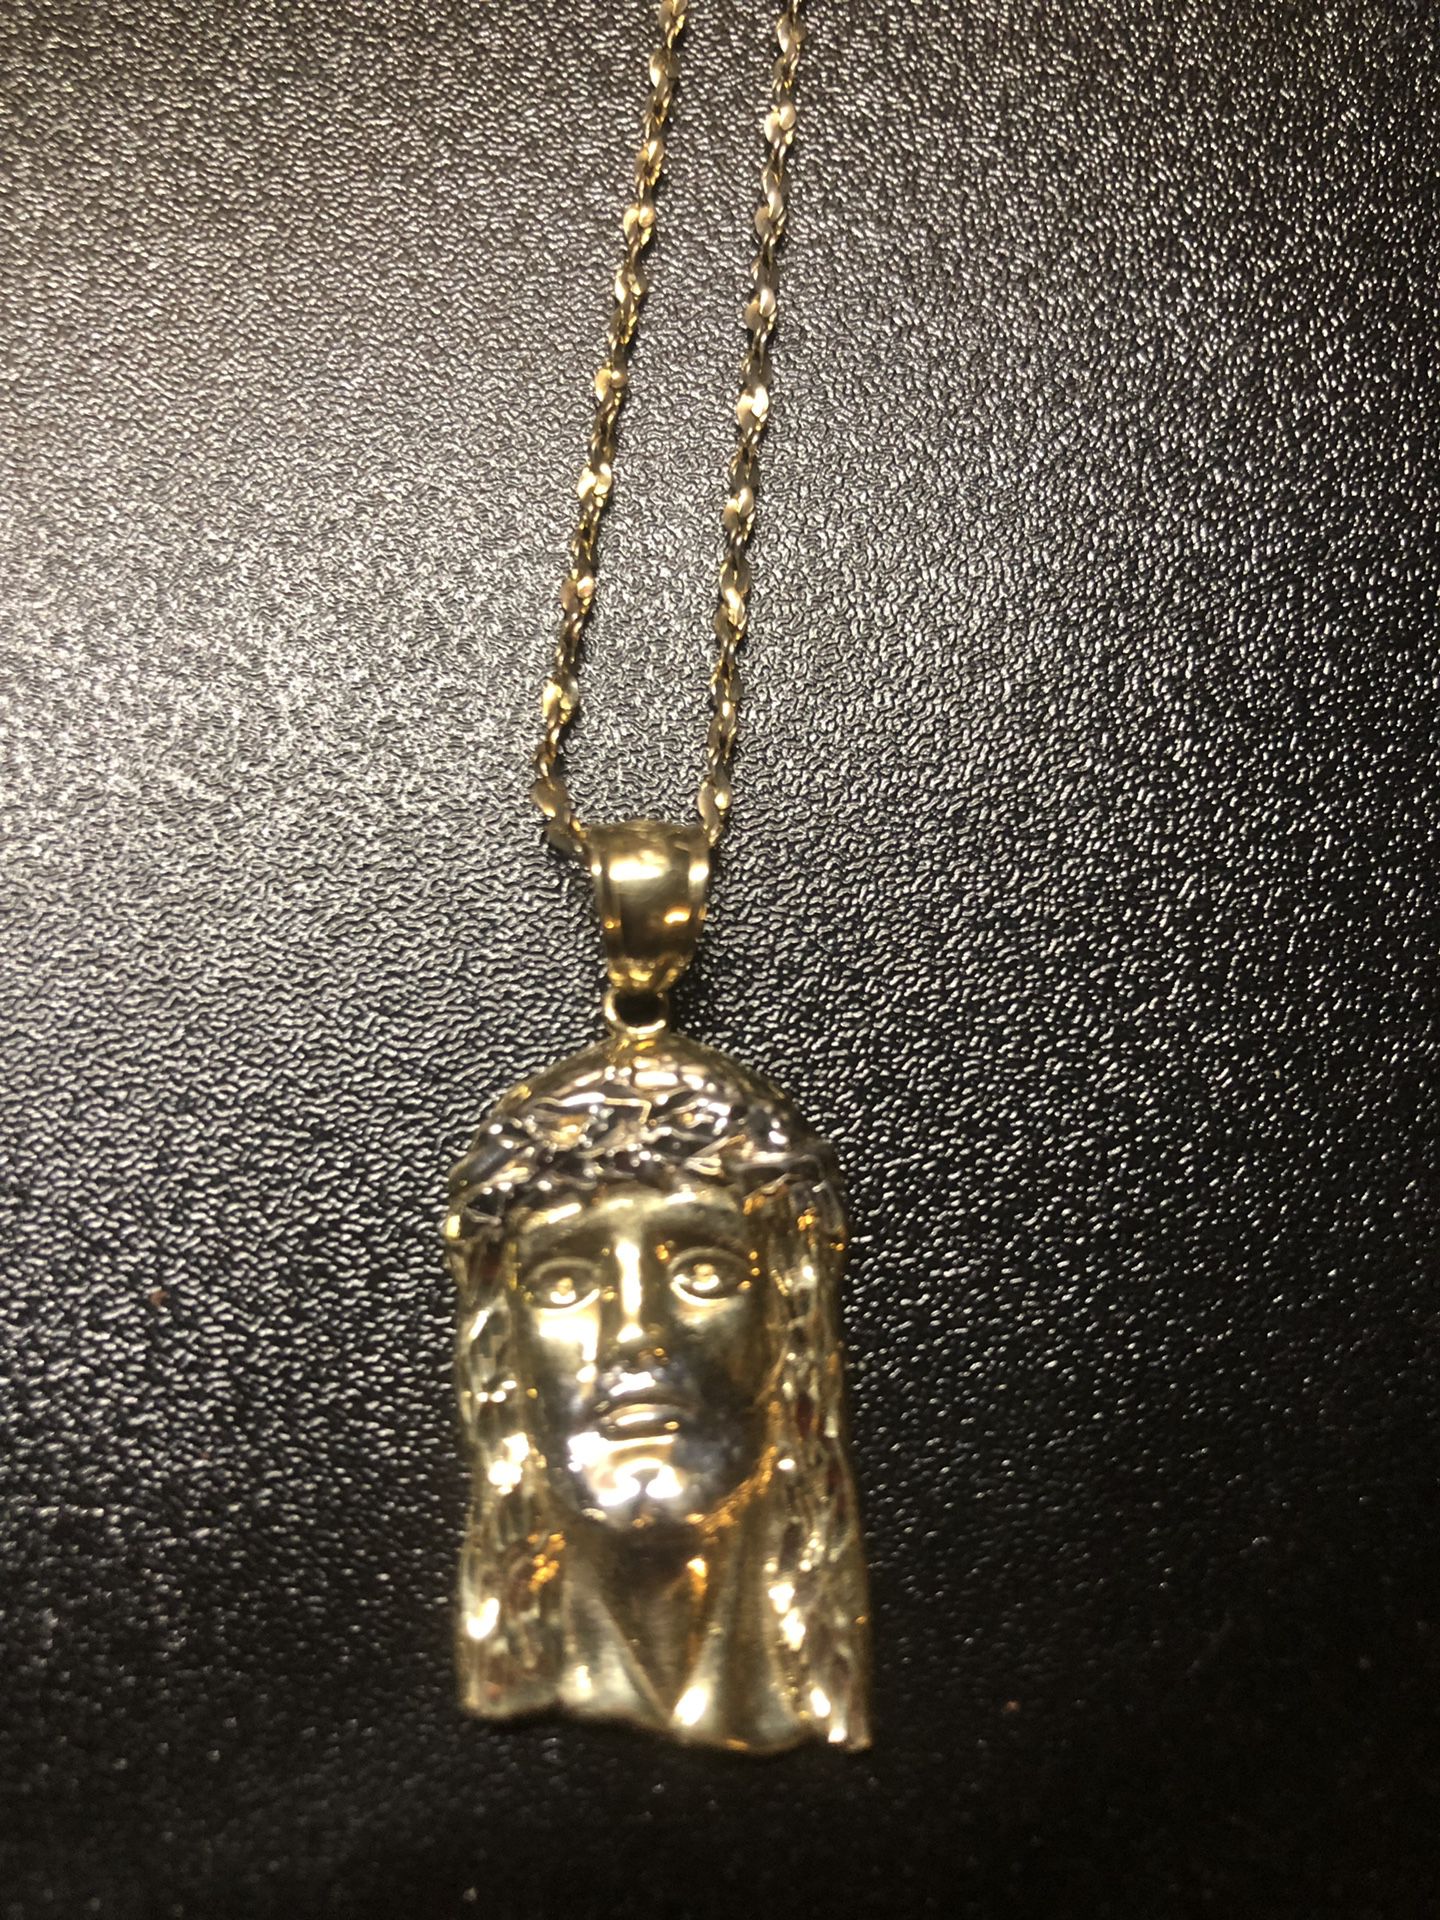 FIRM 10 k gold chain and 10 k gold Jesus piece REAL NOT FAKE NOT PLATED. FIRM